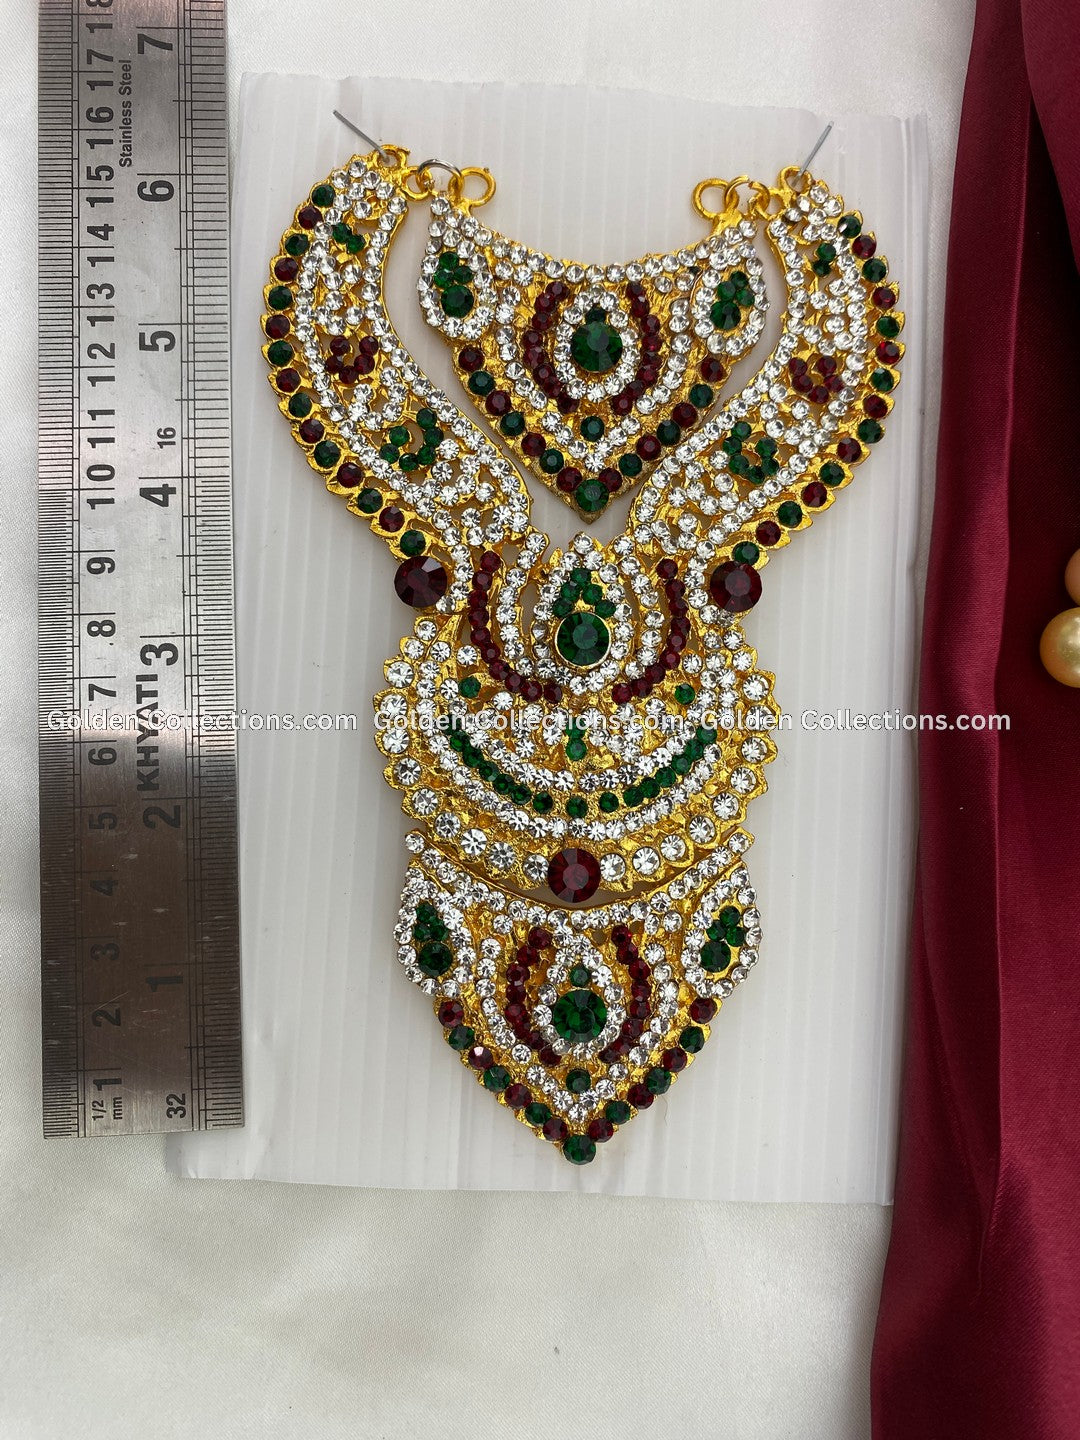 Ornate Deity Short Necklace - GoldenCollections DSN-038 2